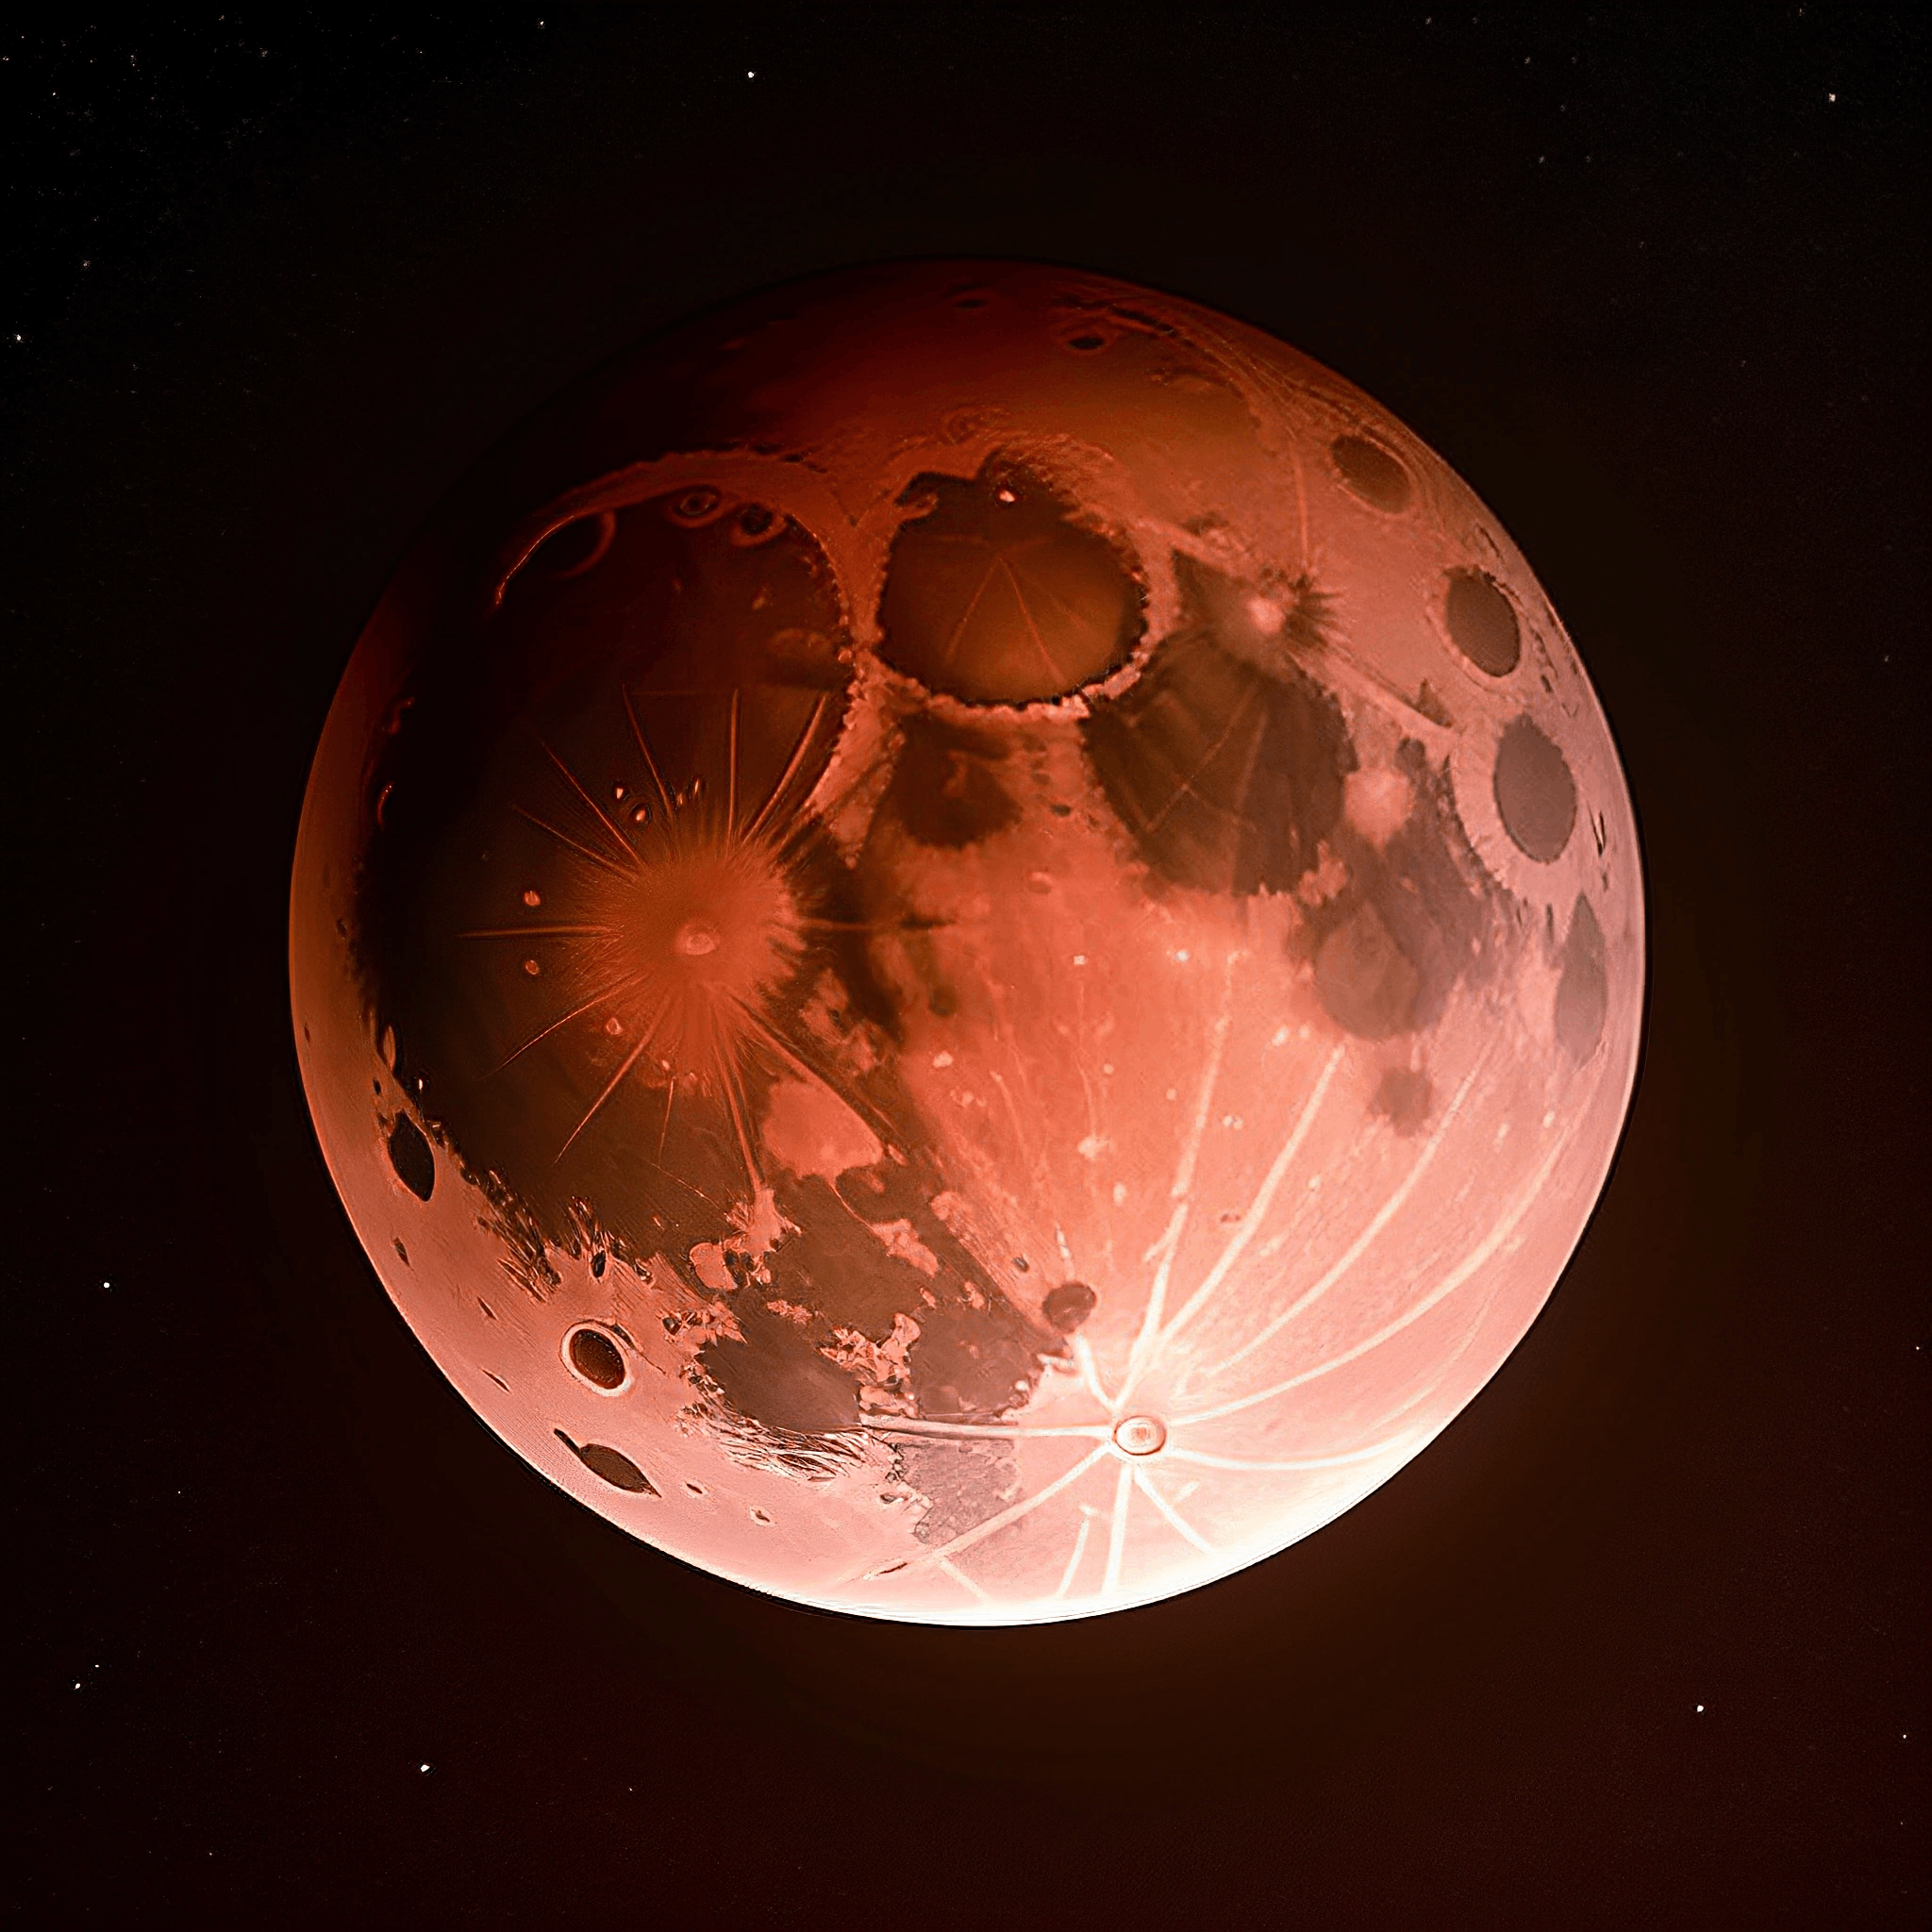 image of a red moon with a star in the background